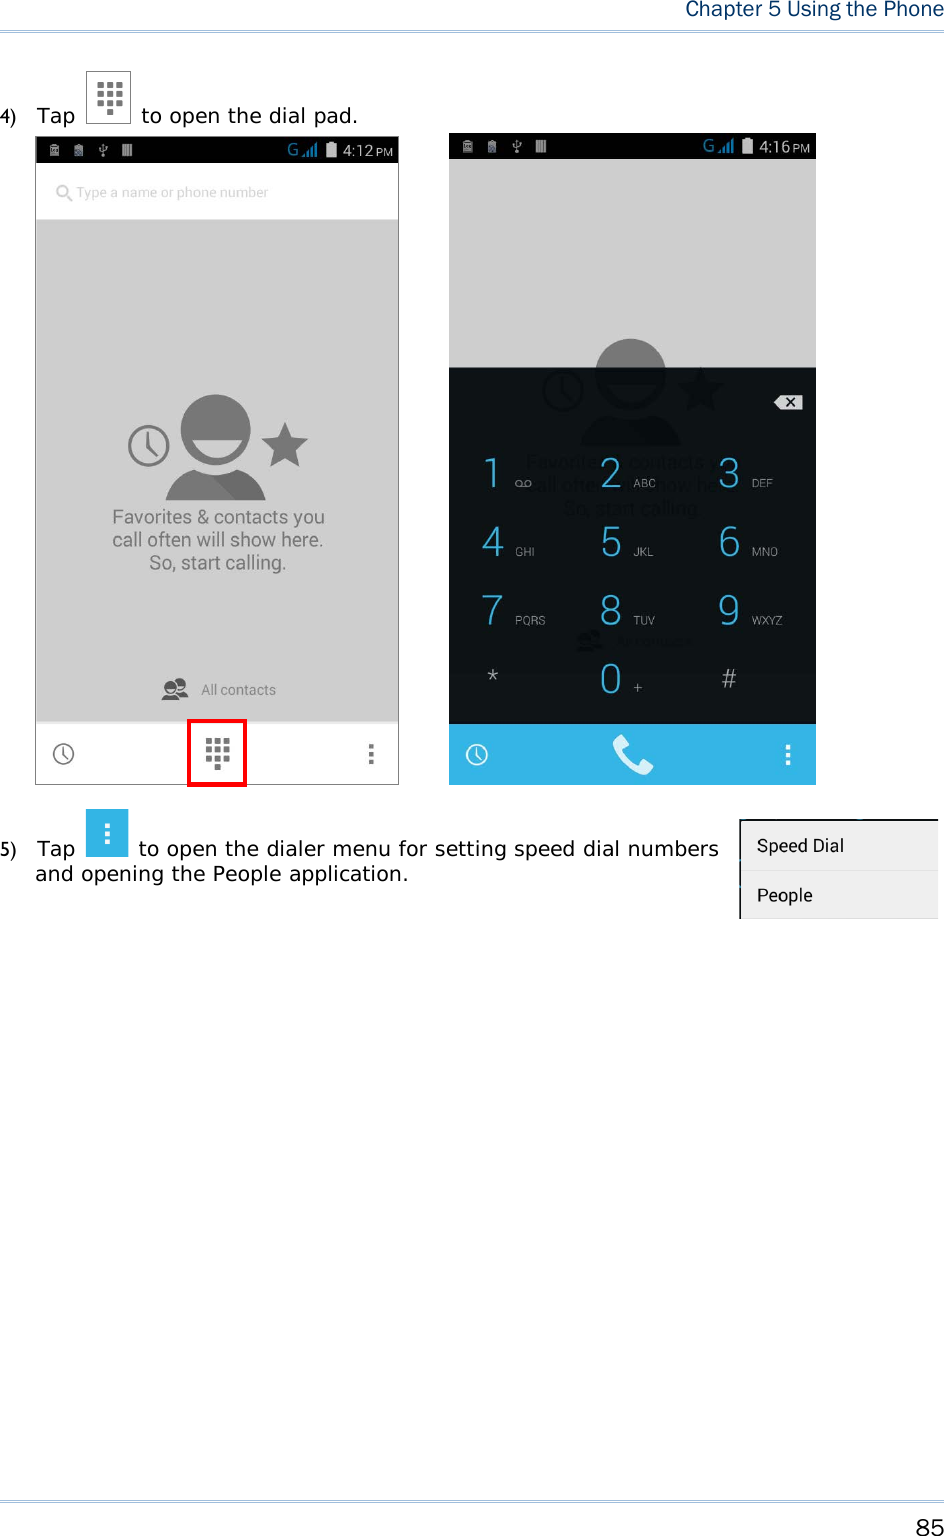  Chapter 5 Using the Phone  4) Tap   to open the dial pad.     5) Tap   to open the dialer menu for setting speed dial numbers and opening the People application.      85 